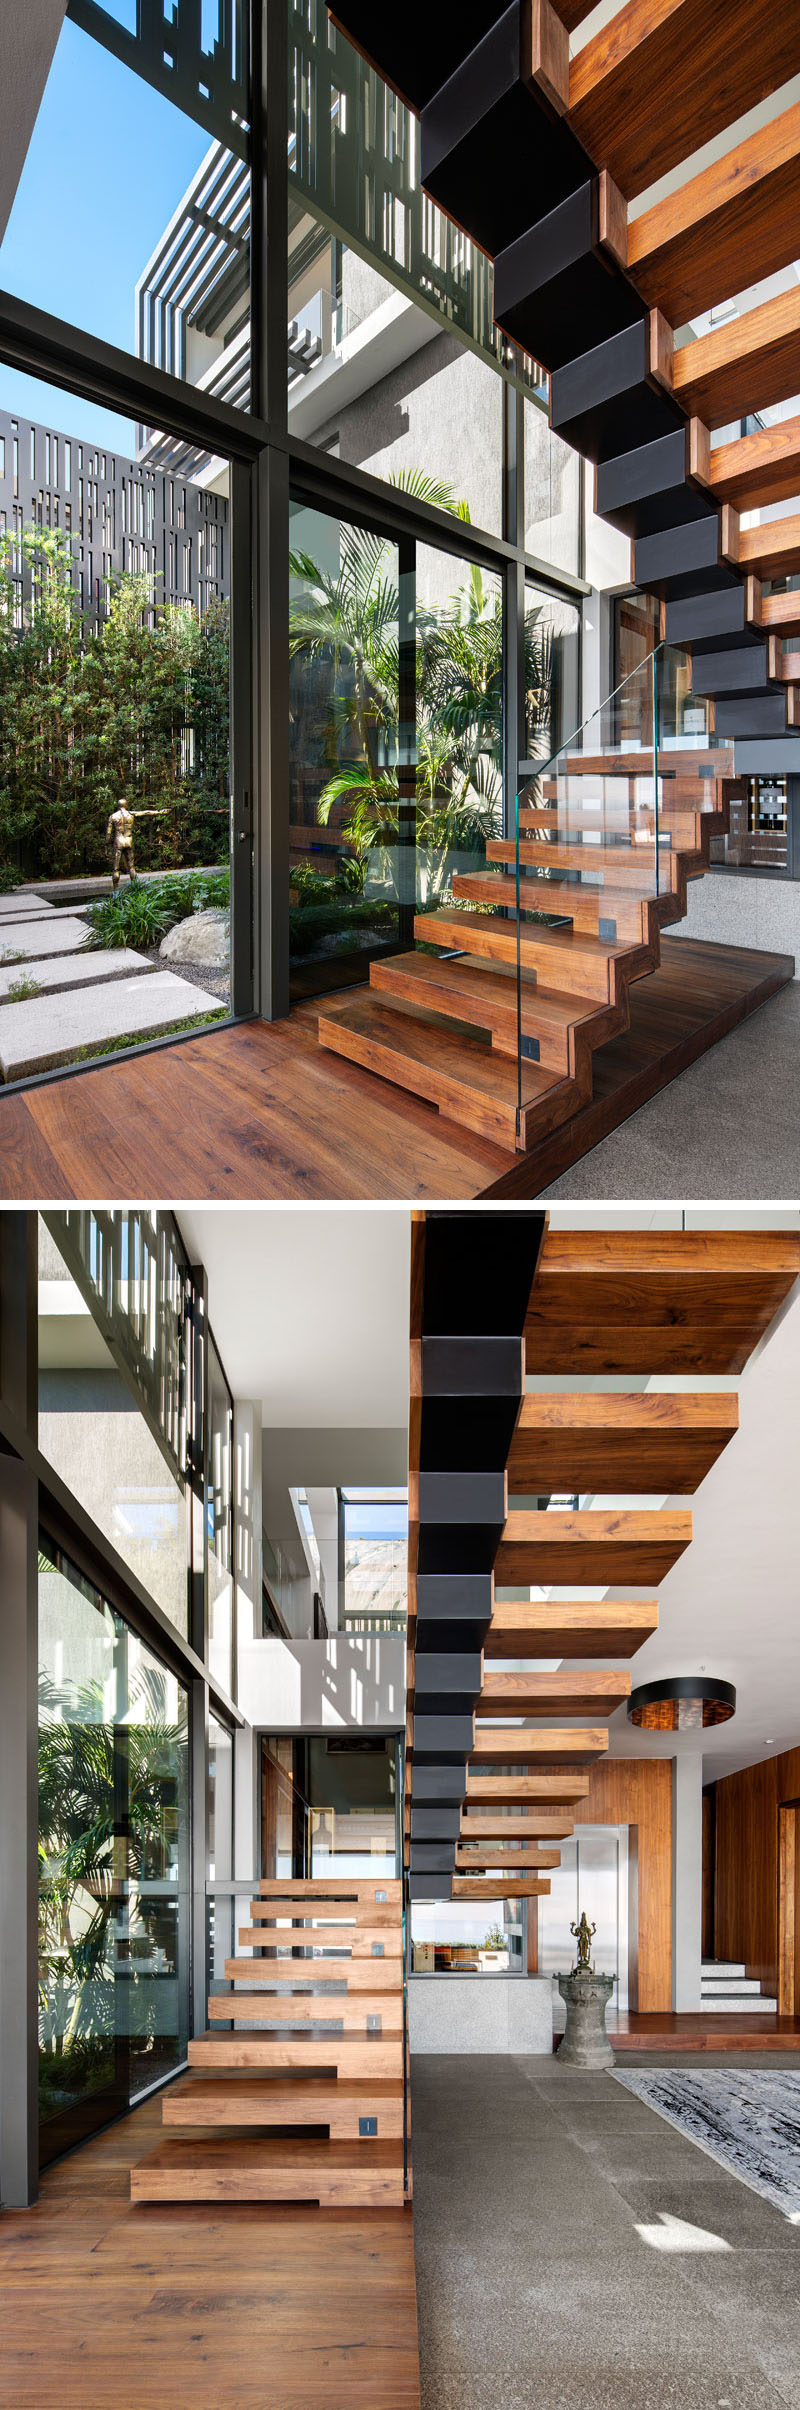 Modern wood and black metal stairs lead up to the upper floor of the home, while glass railings appear invisible and allow the view of the courtyard to be uninterrupted.